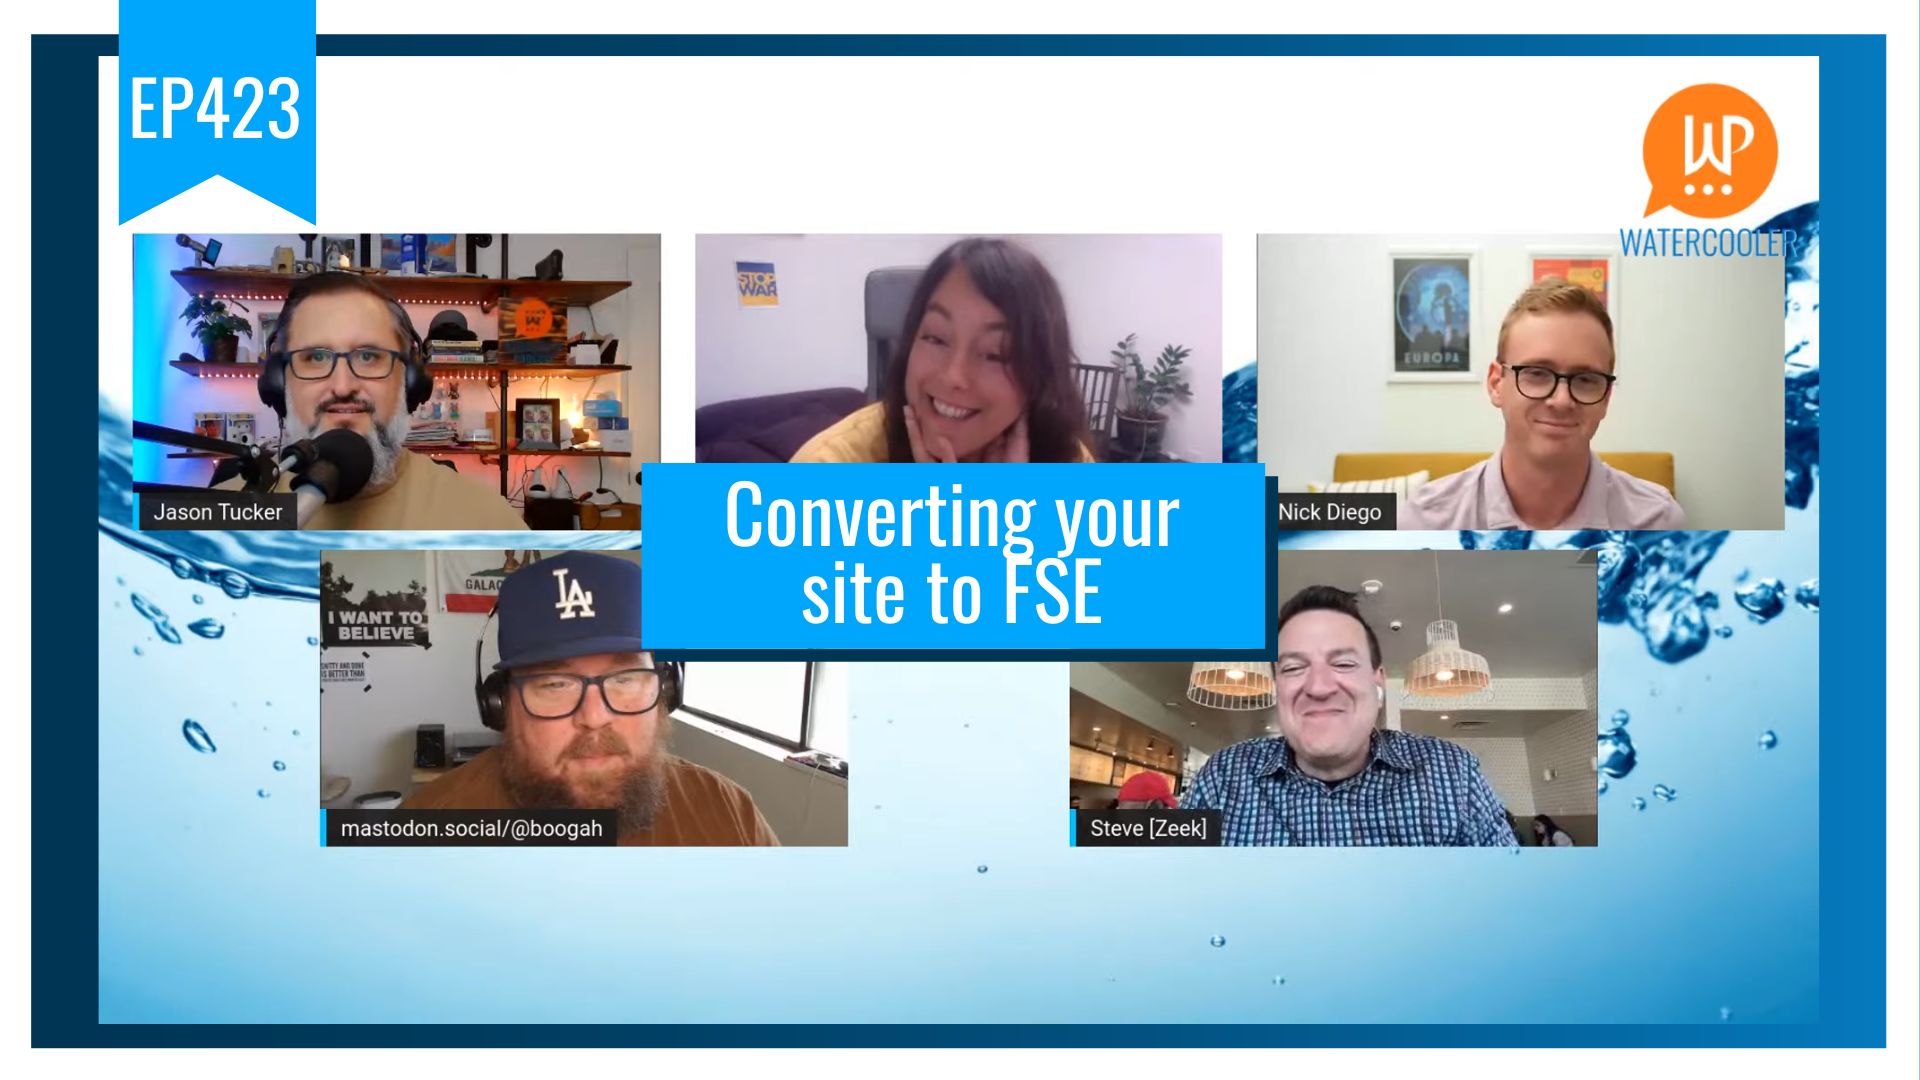 EP423 - Converting your site to FSE